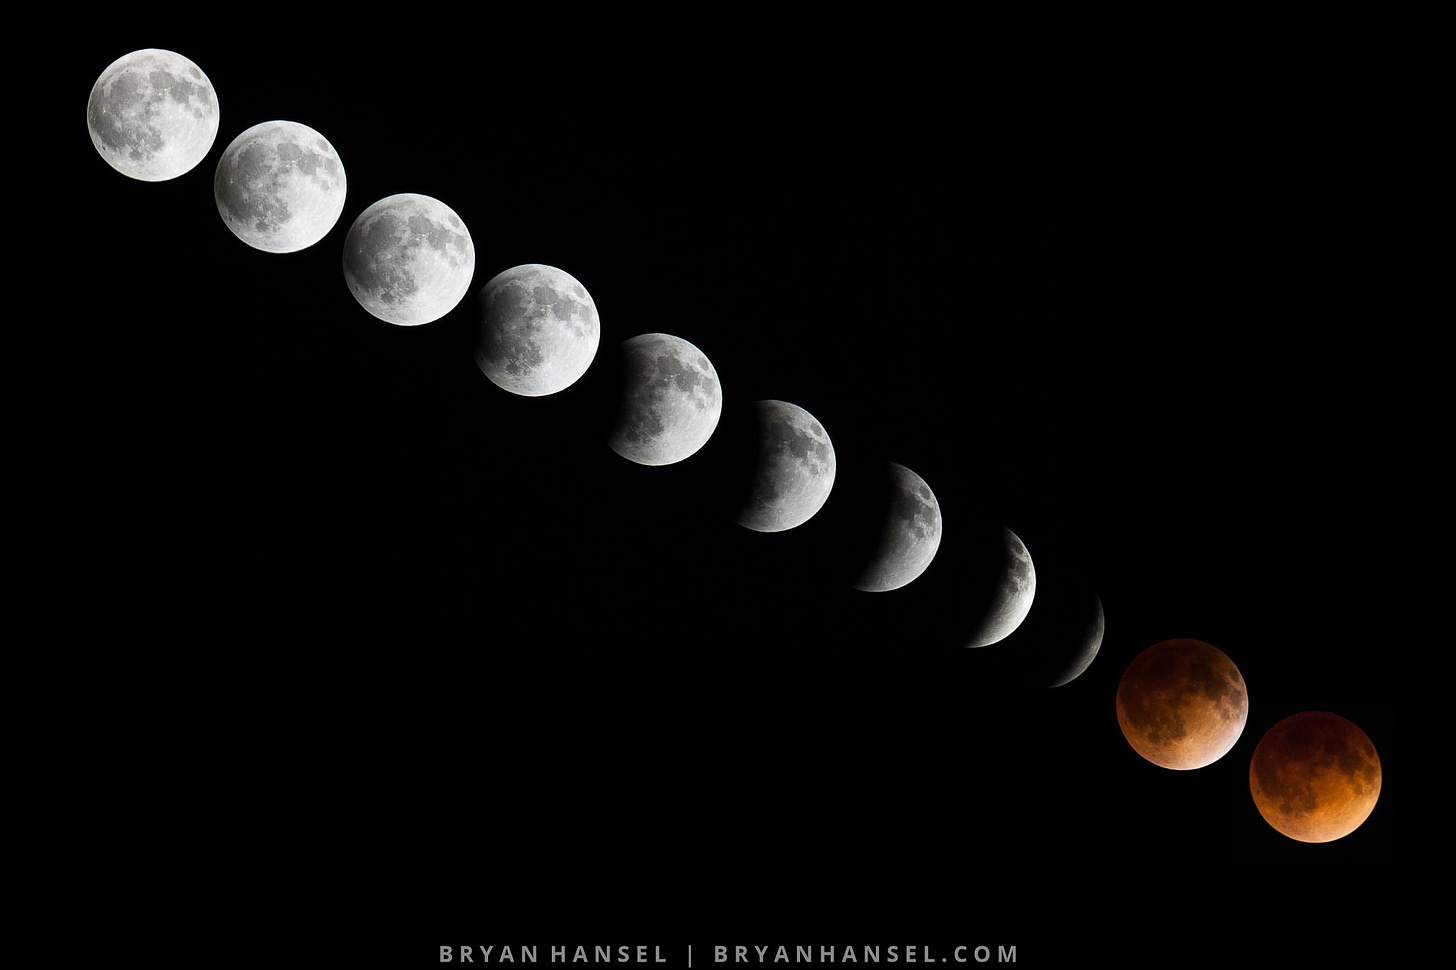 Multiple full moons in various stages of eclipse overlaid on each other.